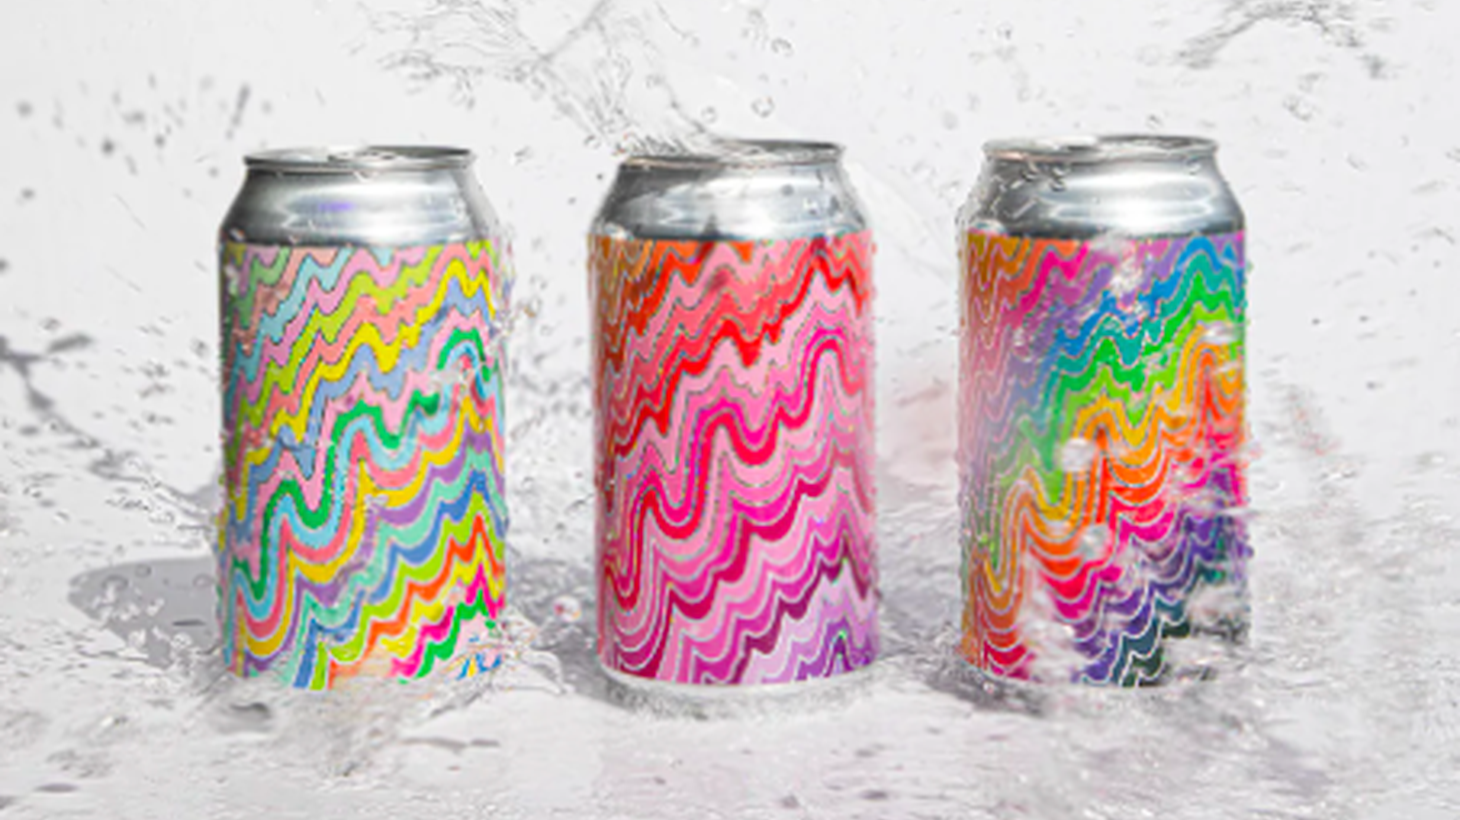 Recommended by a few of LA’s top wine sellers, Las Jaras Waves canned wine is a summer favorite.